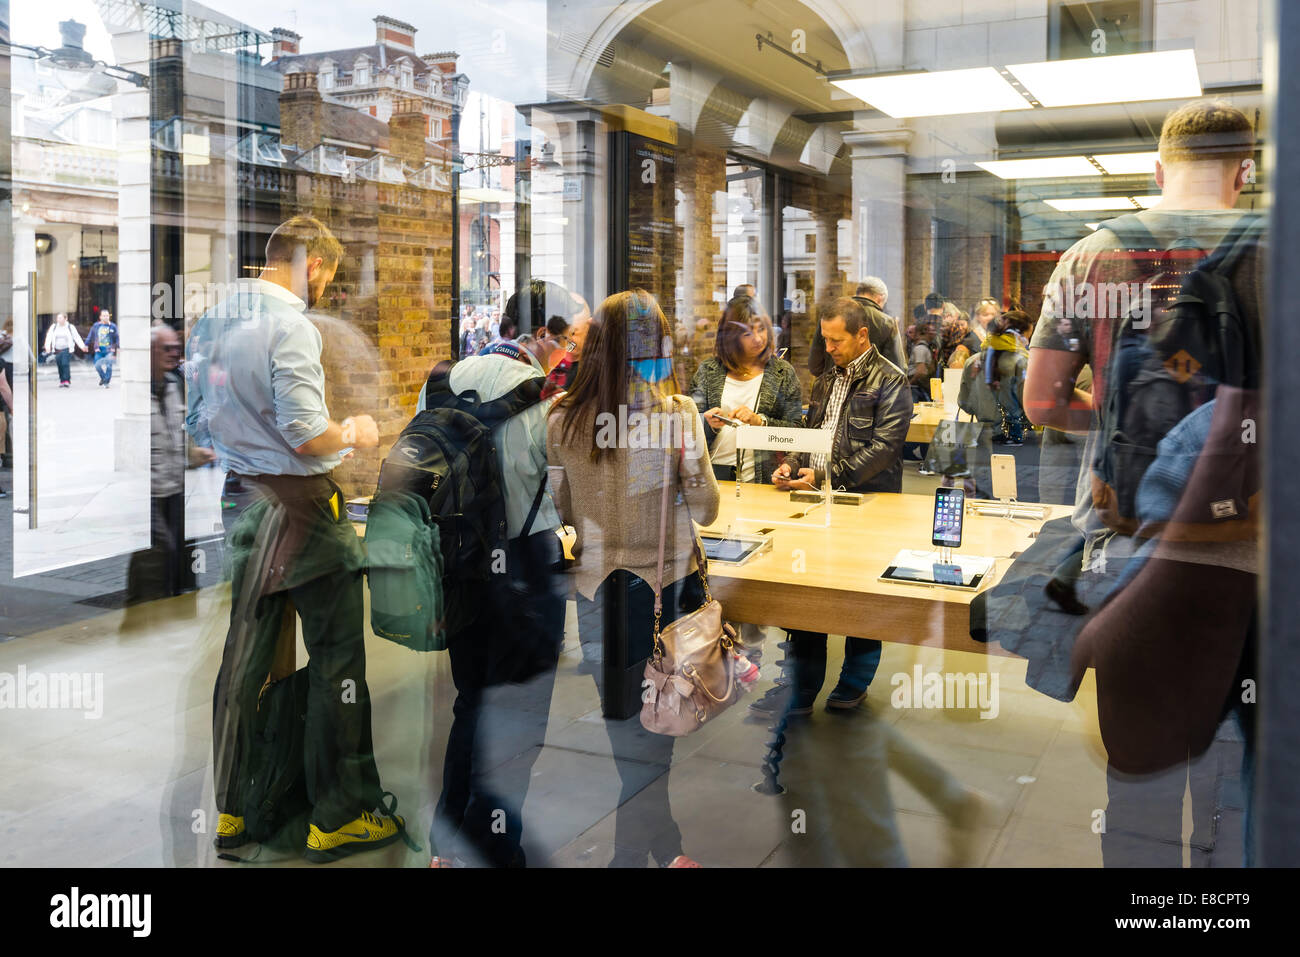 London, United Kingdom - September 26, 2014: Customers admiring the new Apple iPhone 6 and iPhone 6 Plus at the Apple Inc. store Stock Photo